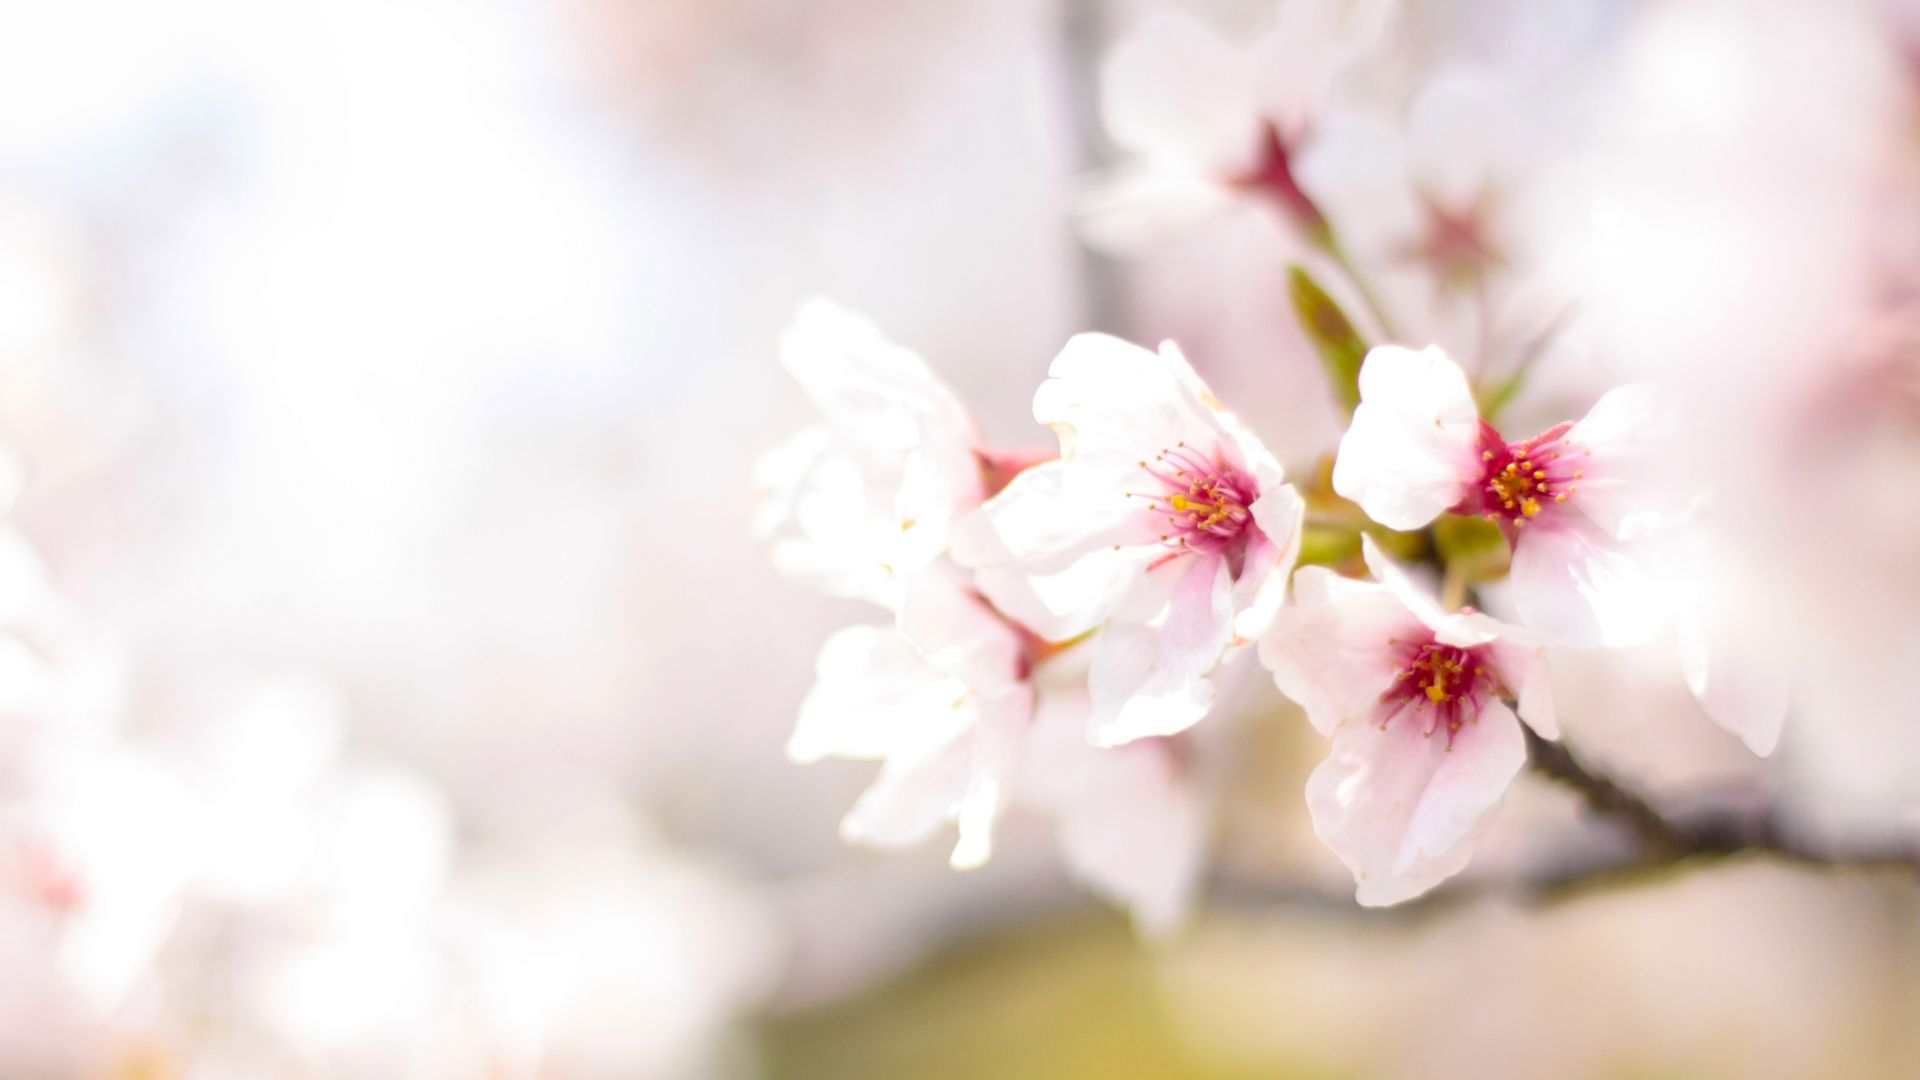 Cute Cherry Blossom Wallpaper Blue Sky Background Wallpaper Image For Free  Download  Pngtree